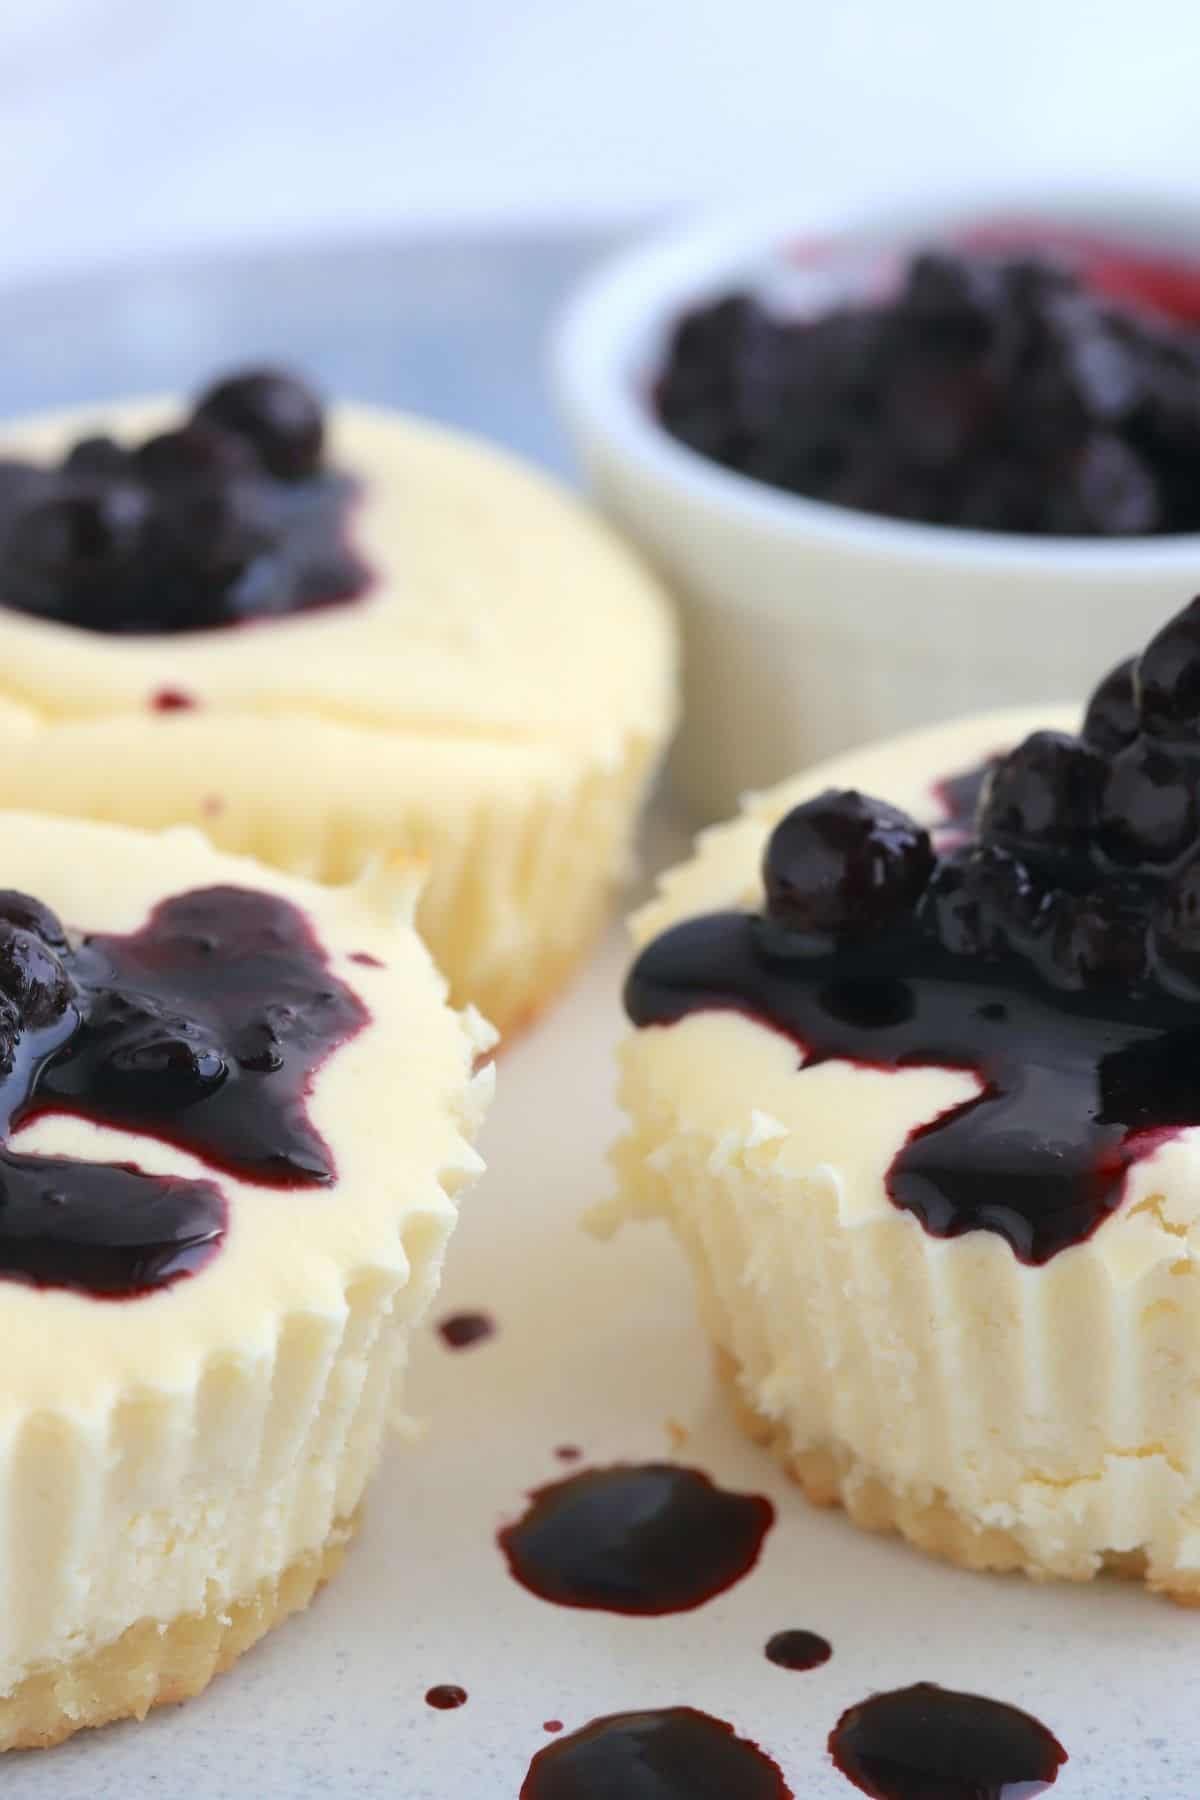 keto cheesecake cupcakes topped with blueberries and a side bowl of blueberries